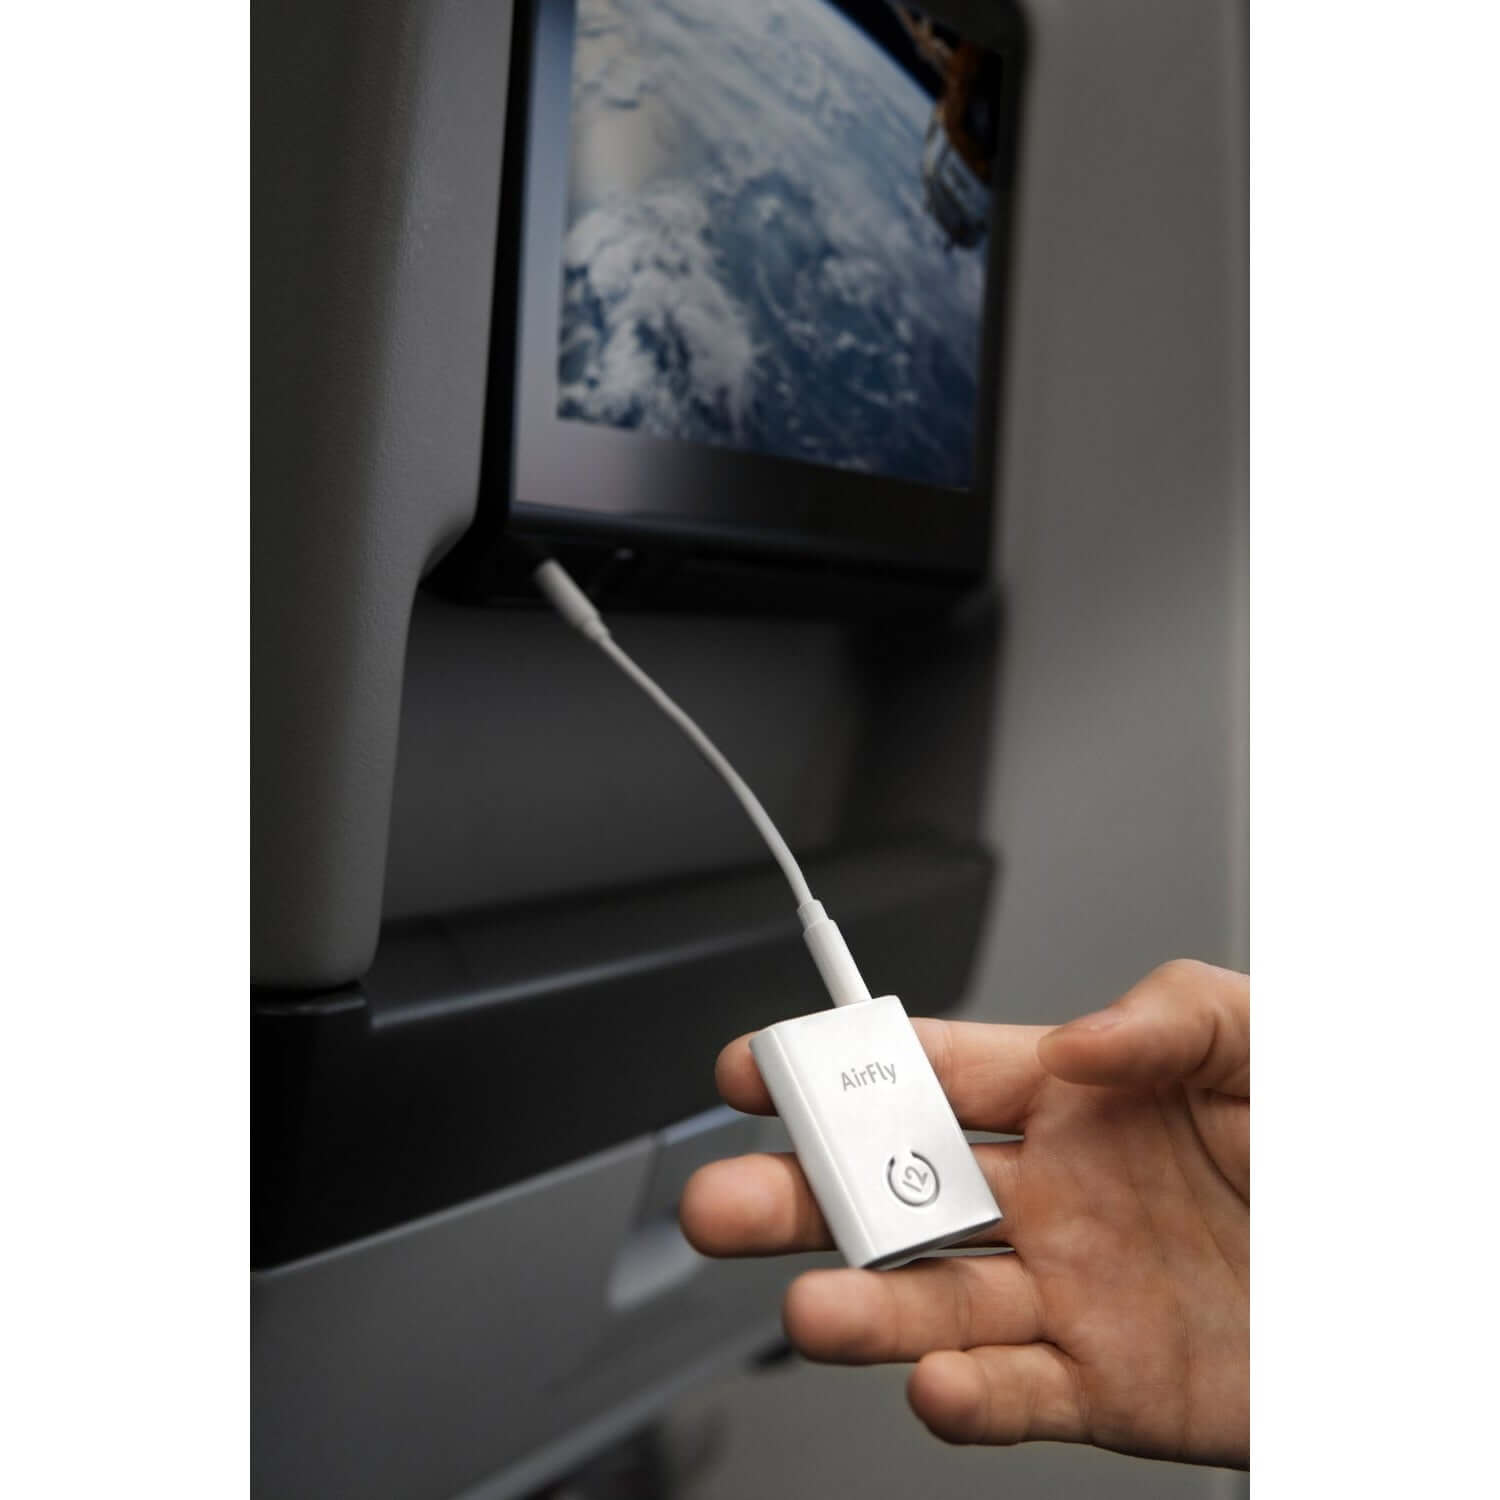 BEON.COM.AU Use your AirPods or wireless headphones with any wired headphone jack.Wish you could listen to in-flight TV with your AirPods? Want to hear the gym cardio machine's TV audio with your wireless headphones? Now you can, thanks to AirFly - a tiny device that connects wireless headphones to wired... Twelve South at BEON.COM.AU